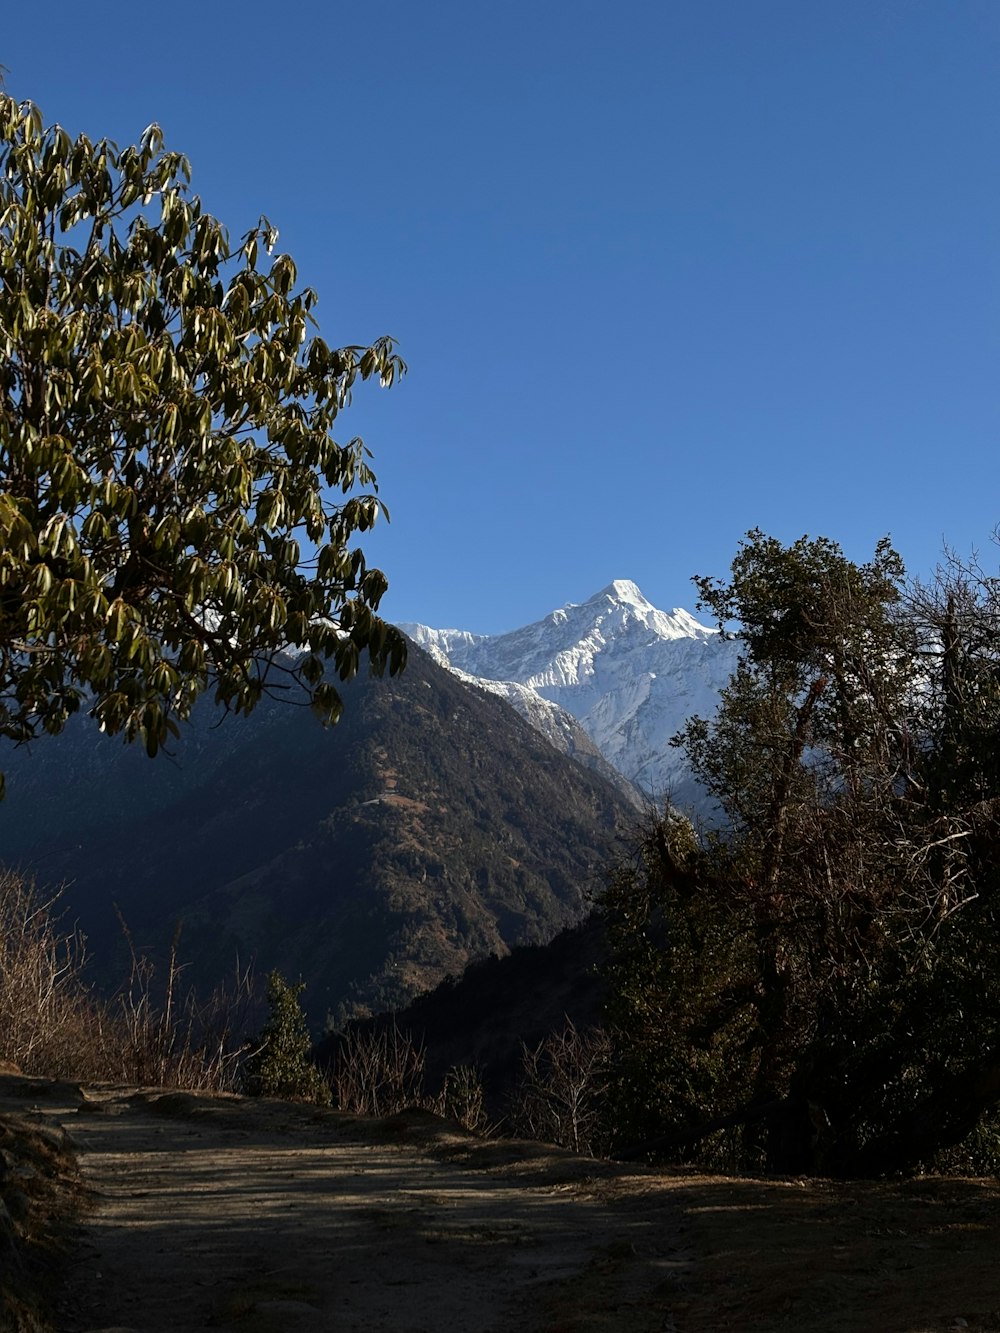 a view of a mountain range with a tree in the foreground